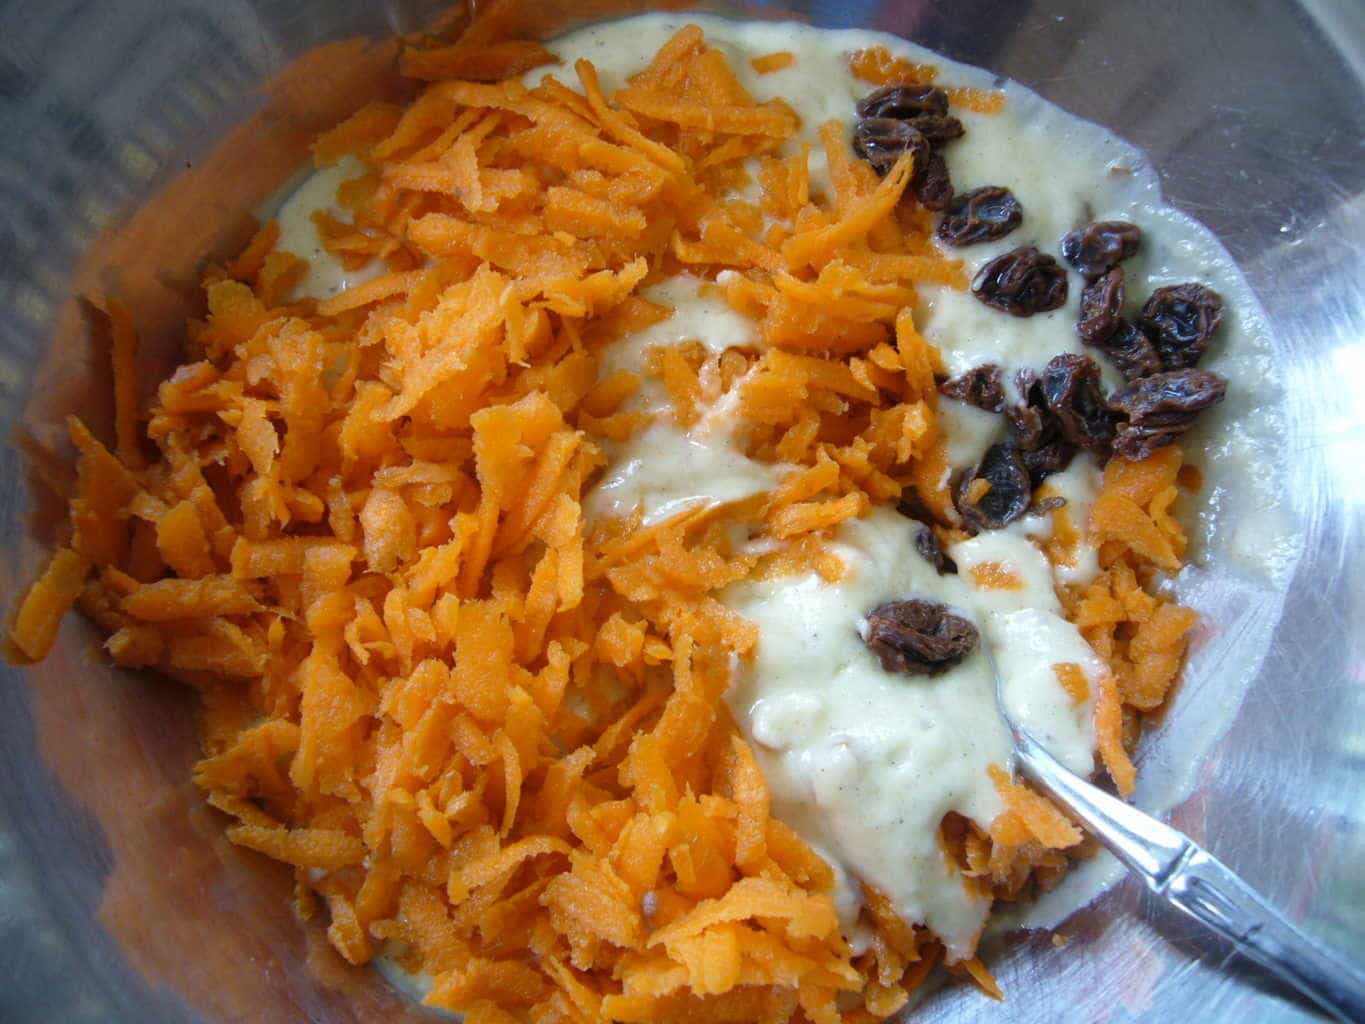 Addition of grated carrots and raisins to the batter.